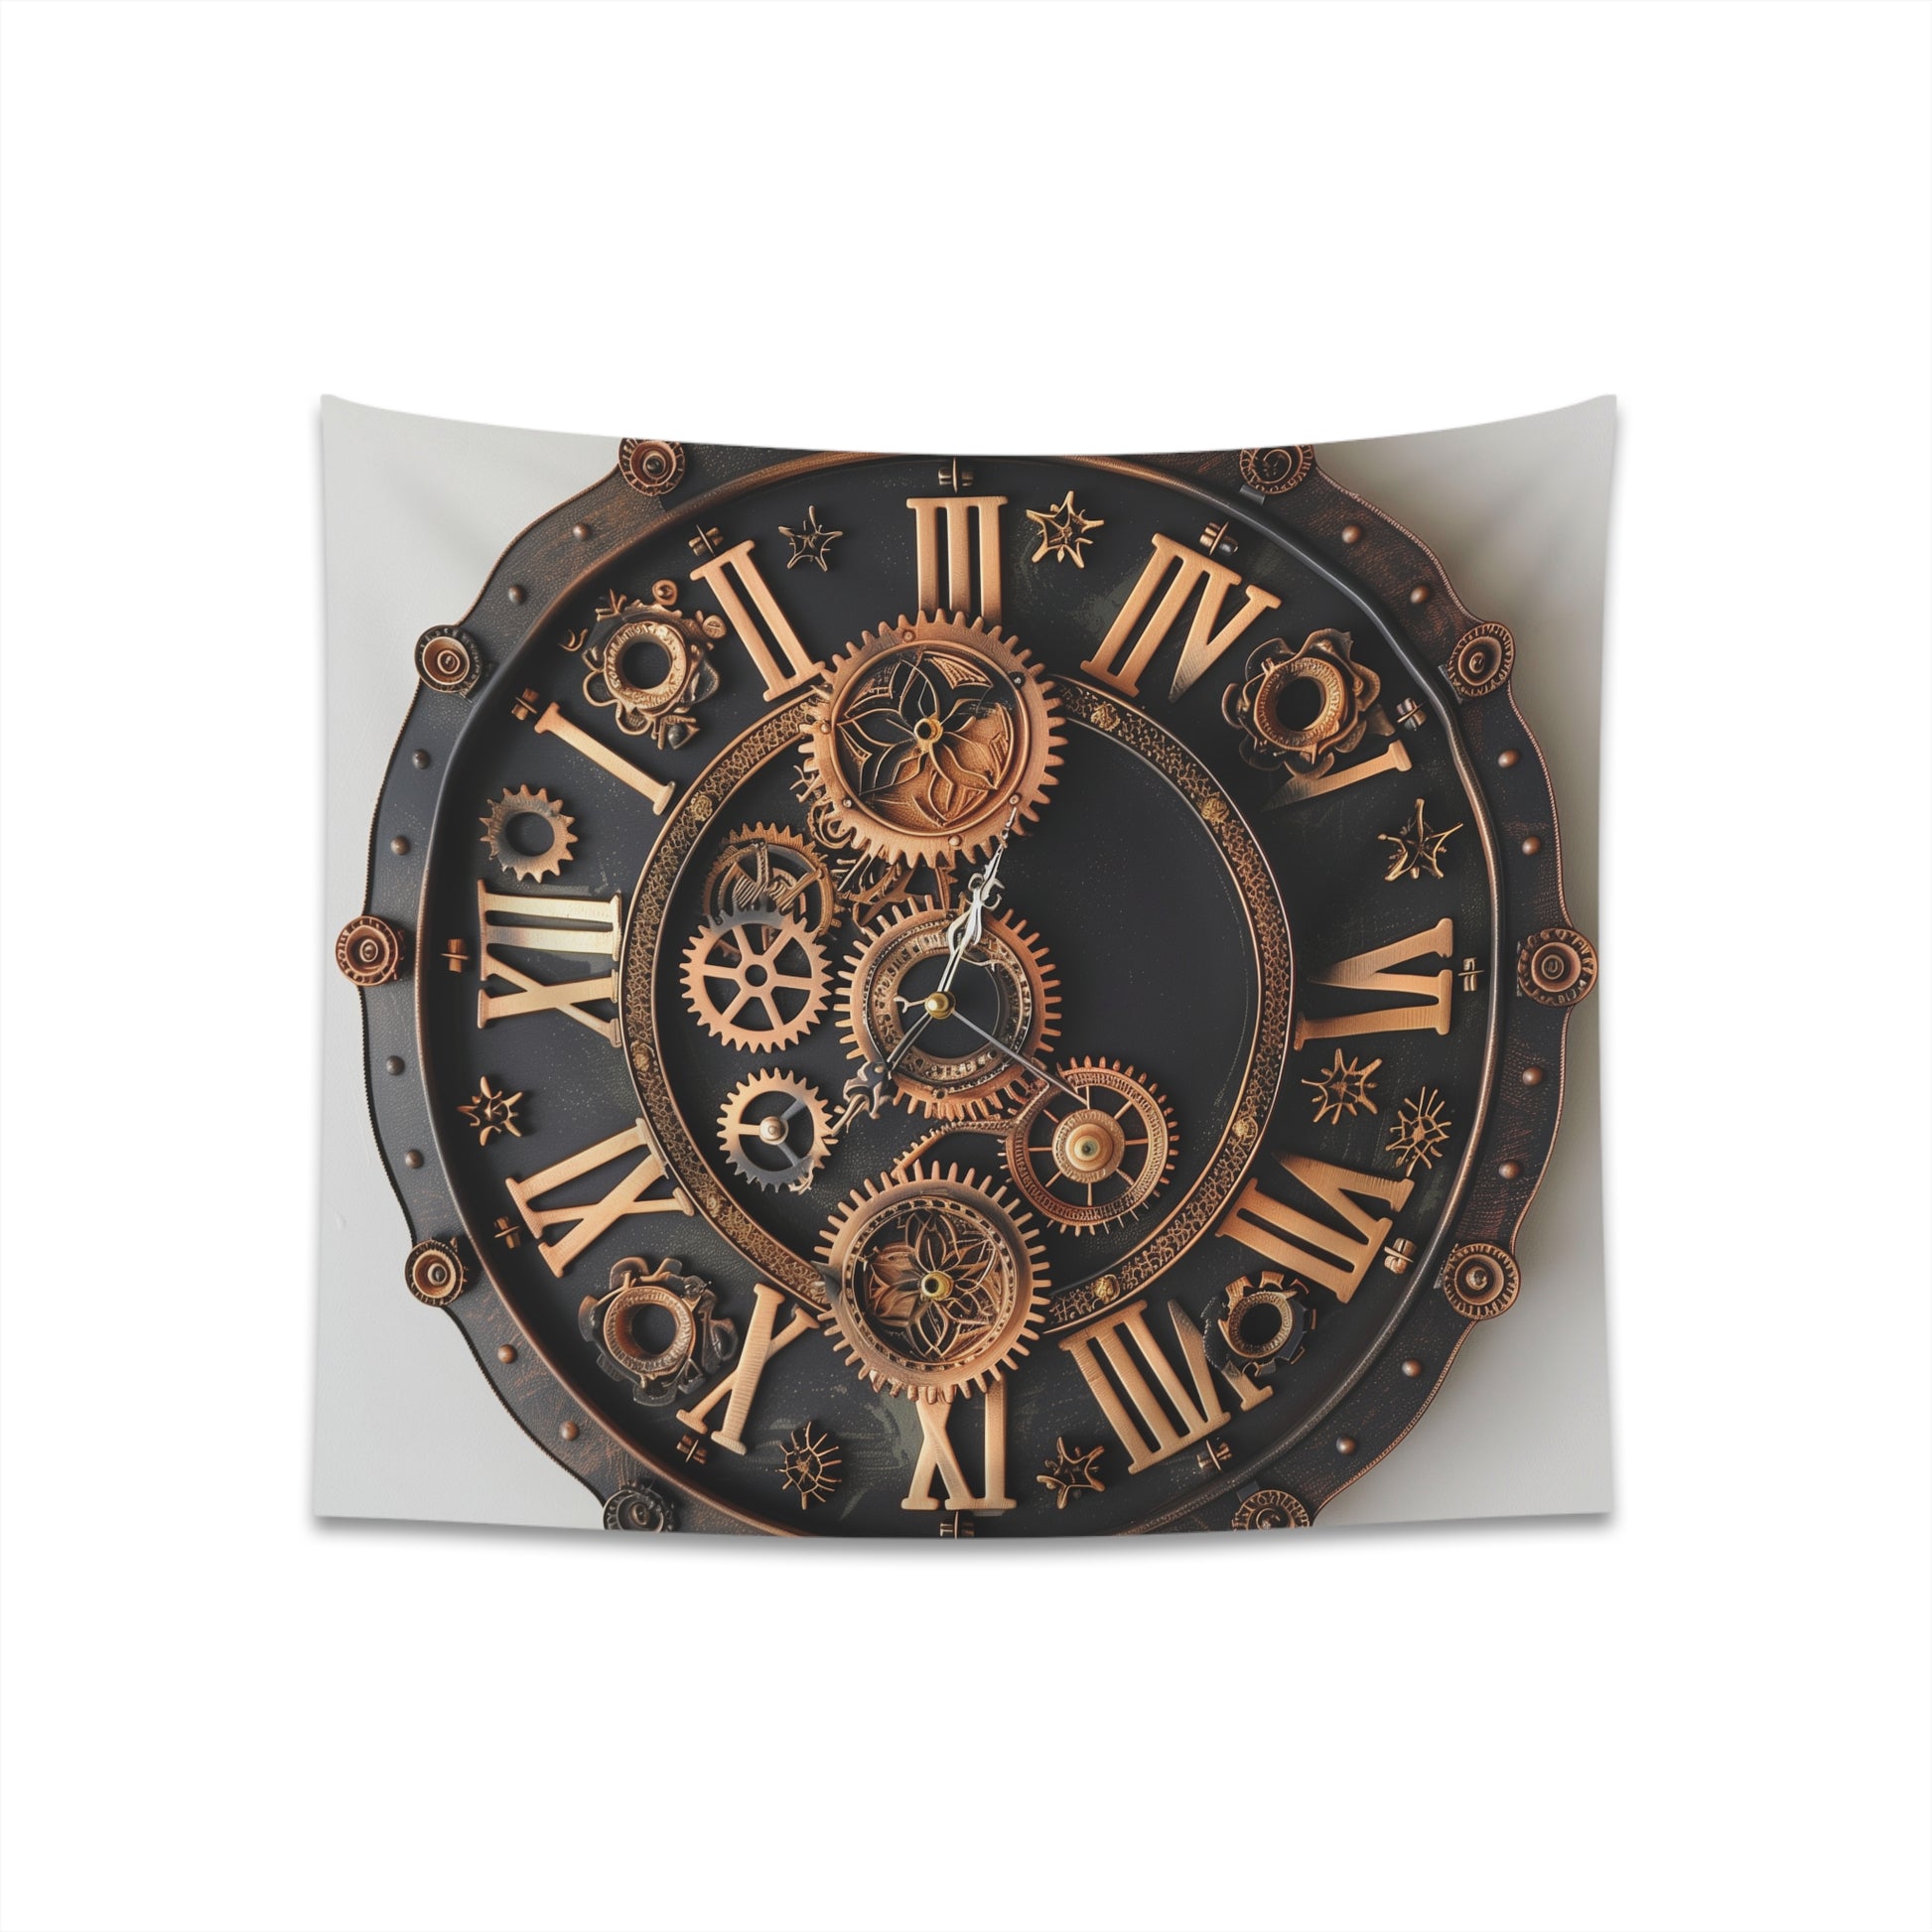 Steampunk Timepiece Tapestry: Industrial Elegance with Gears and Cogs - Perfect for Vintage Charm and Gift Giving